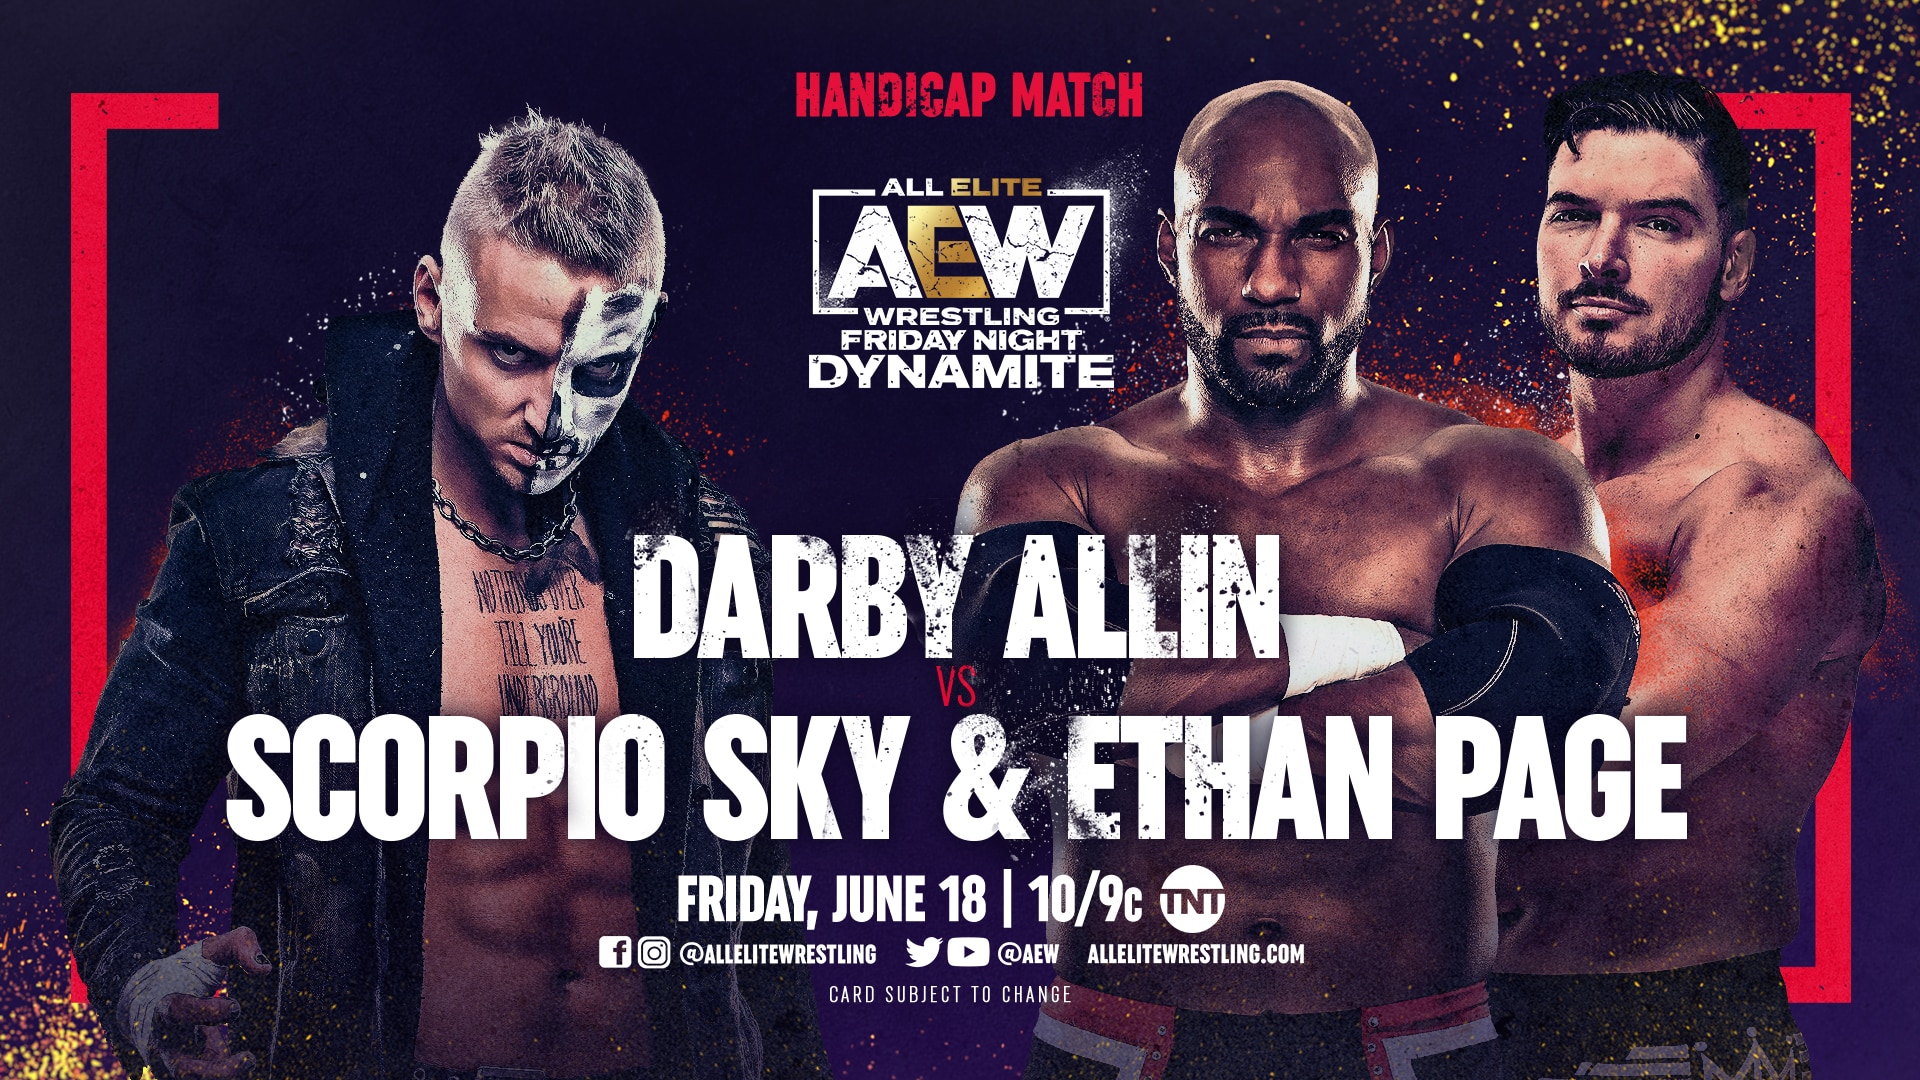 Darby Allin vs Scorpio Sky and Ethan Page